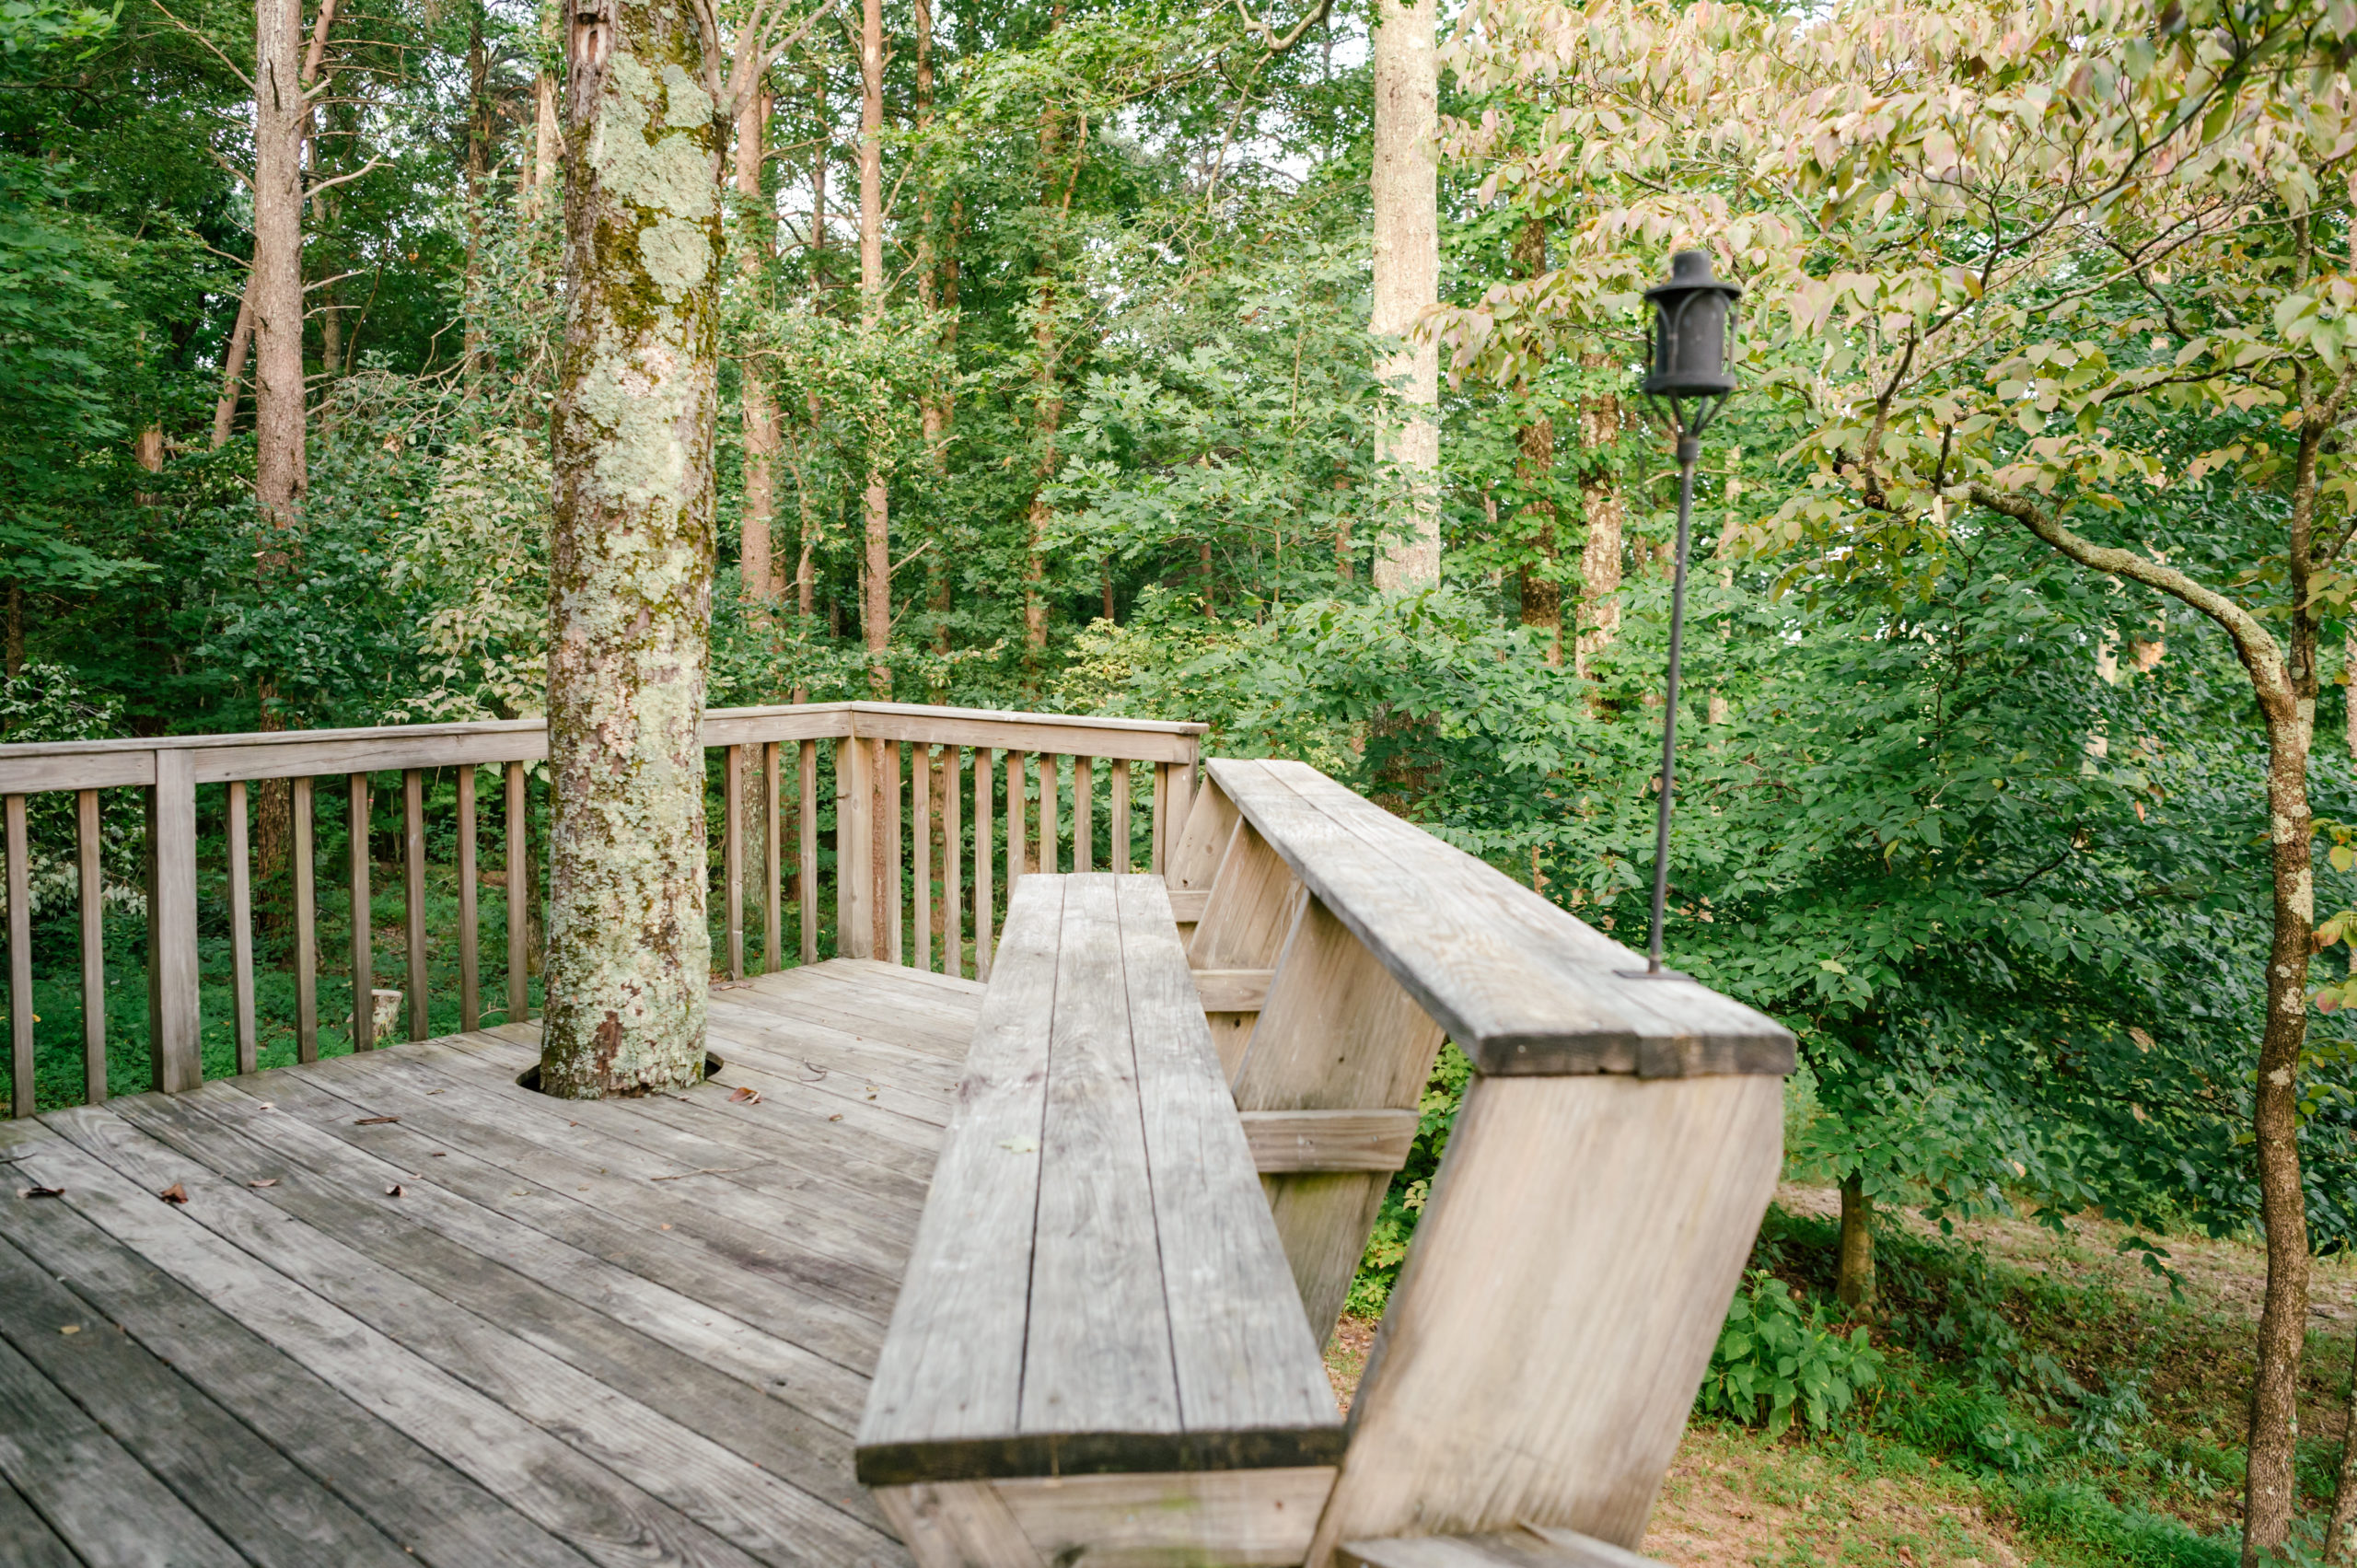 Photo of wood cabin's porch with a wooden bench surrounded by beautiful trees and greenery